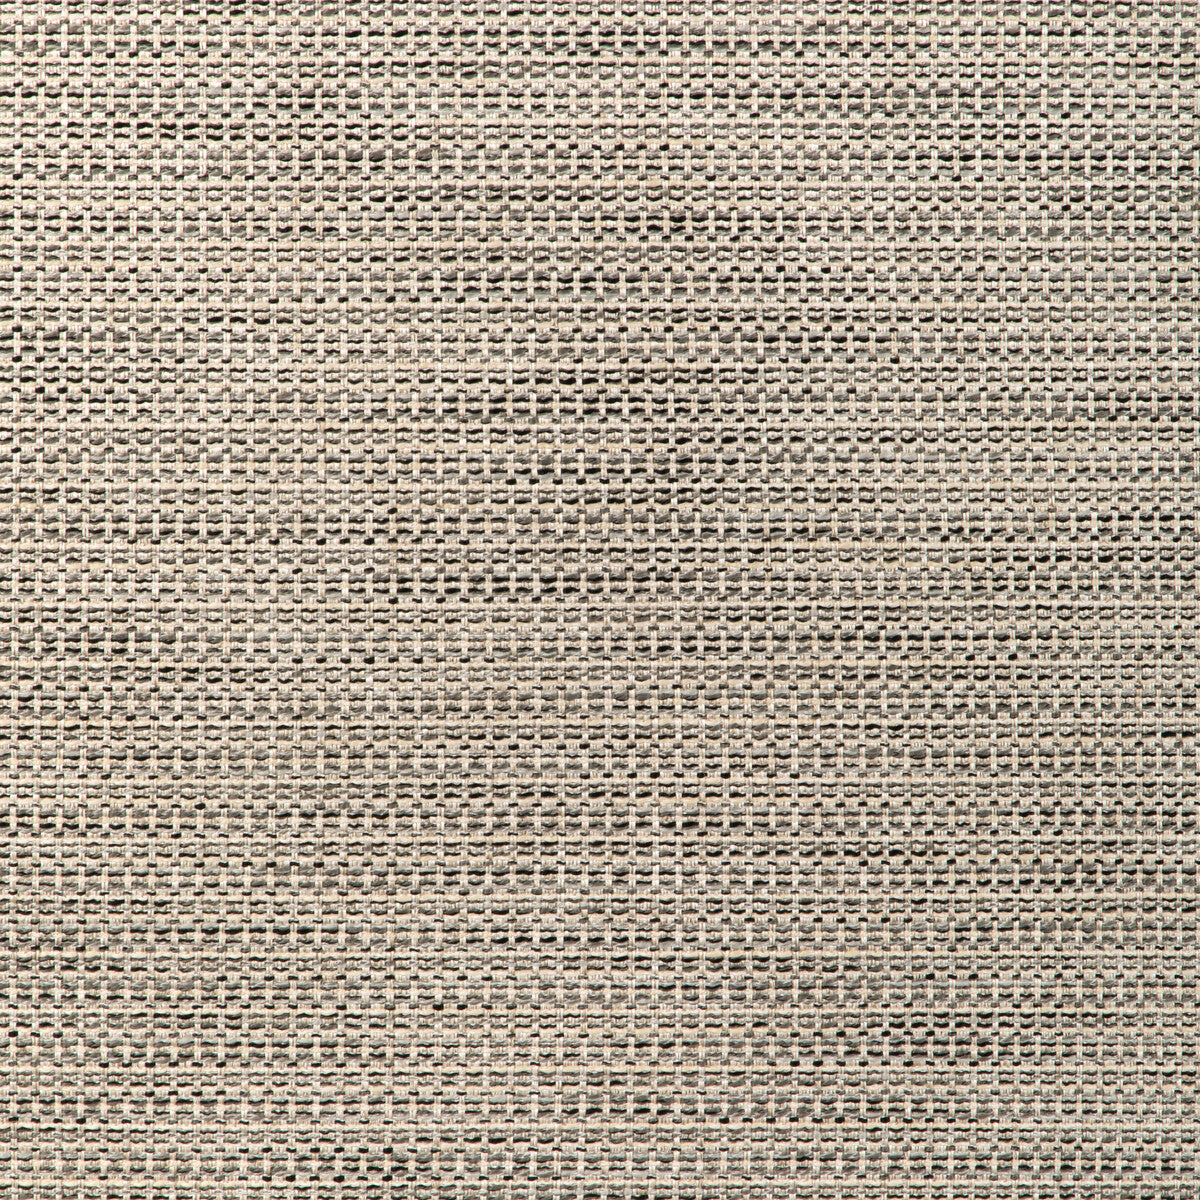 Kravet Design fabric in 37219-816 color - pattern 37219.816.0 - by Kravet Design in the Woven Colors collection